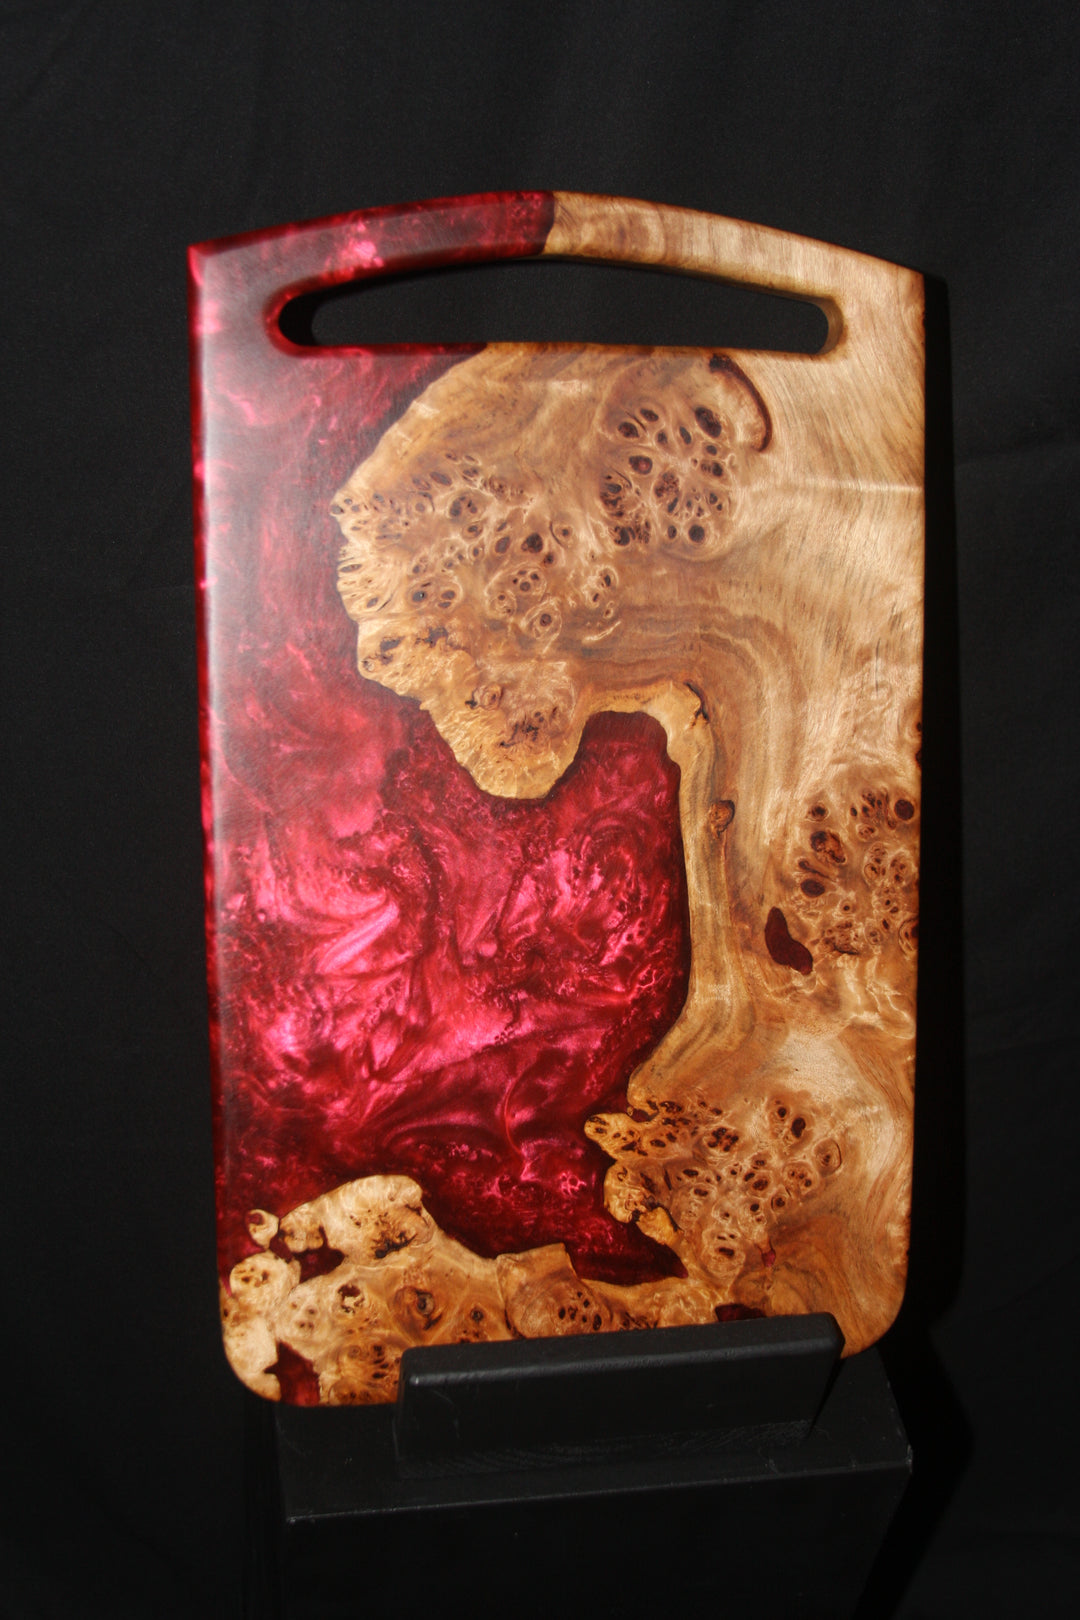 Highly figured cinnamon burl with blood red epoxy resin charcuterie board